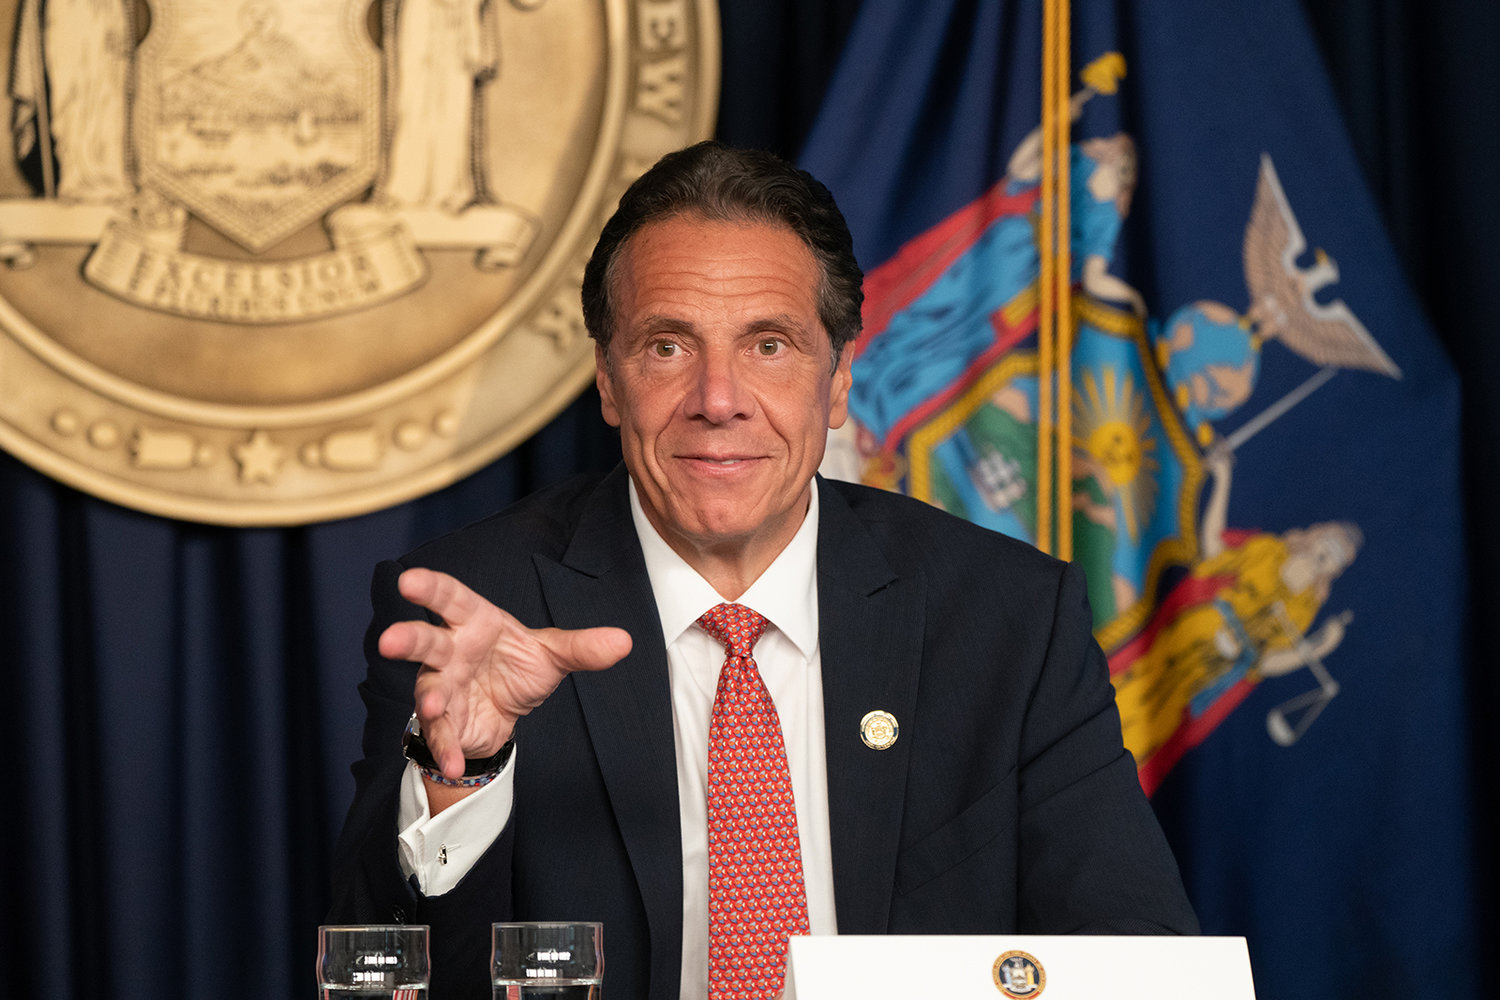 Governor Andrew M. Cuomo provides a COVID-19 update on Aug. 2, 2021. (Don Pollard/Office of Governor Andrew M. Cuomo/TNS)